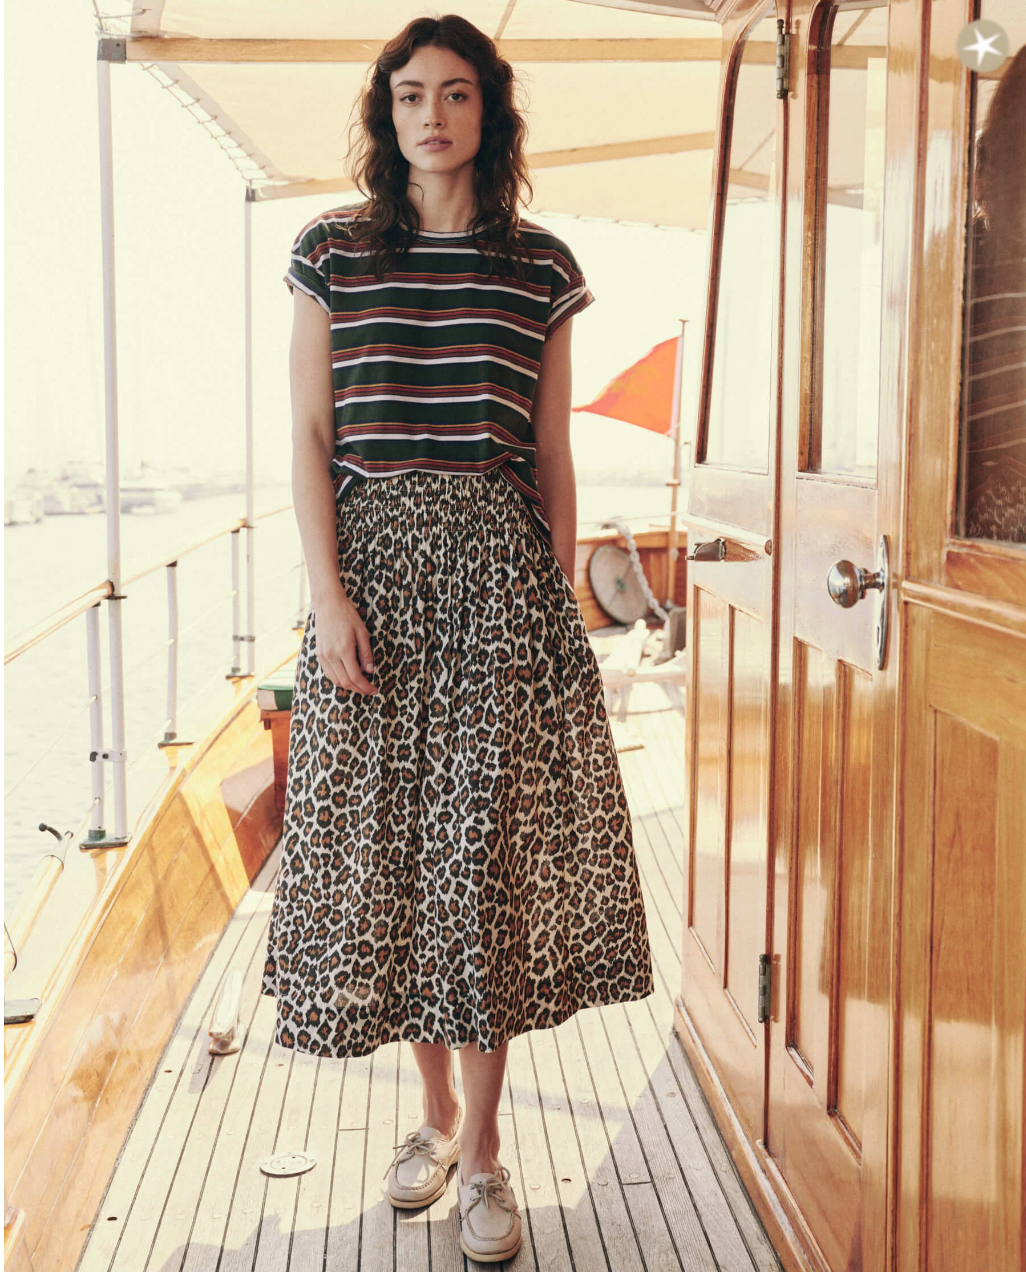 A woman with wavy hair stands on a wooden boat deck. She wears a shadow stripe textured cotton T-shirt, The Viola Skirt by The Great Inc. with a wide smocked waistband, and white sneakers. The boat has a polished wooden cabin door and a shaded canopy area. The background is bright and sunlit.
